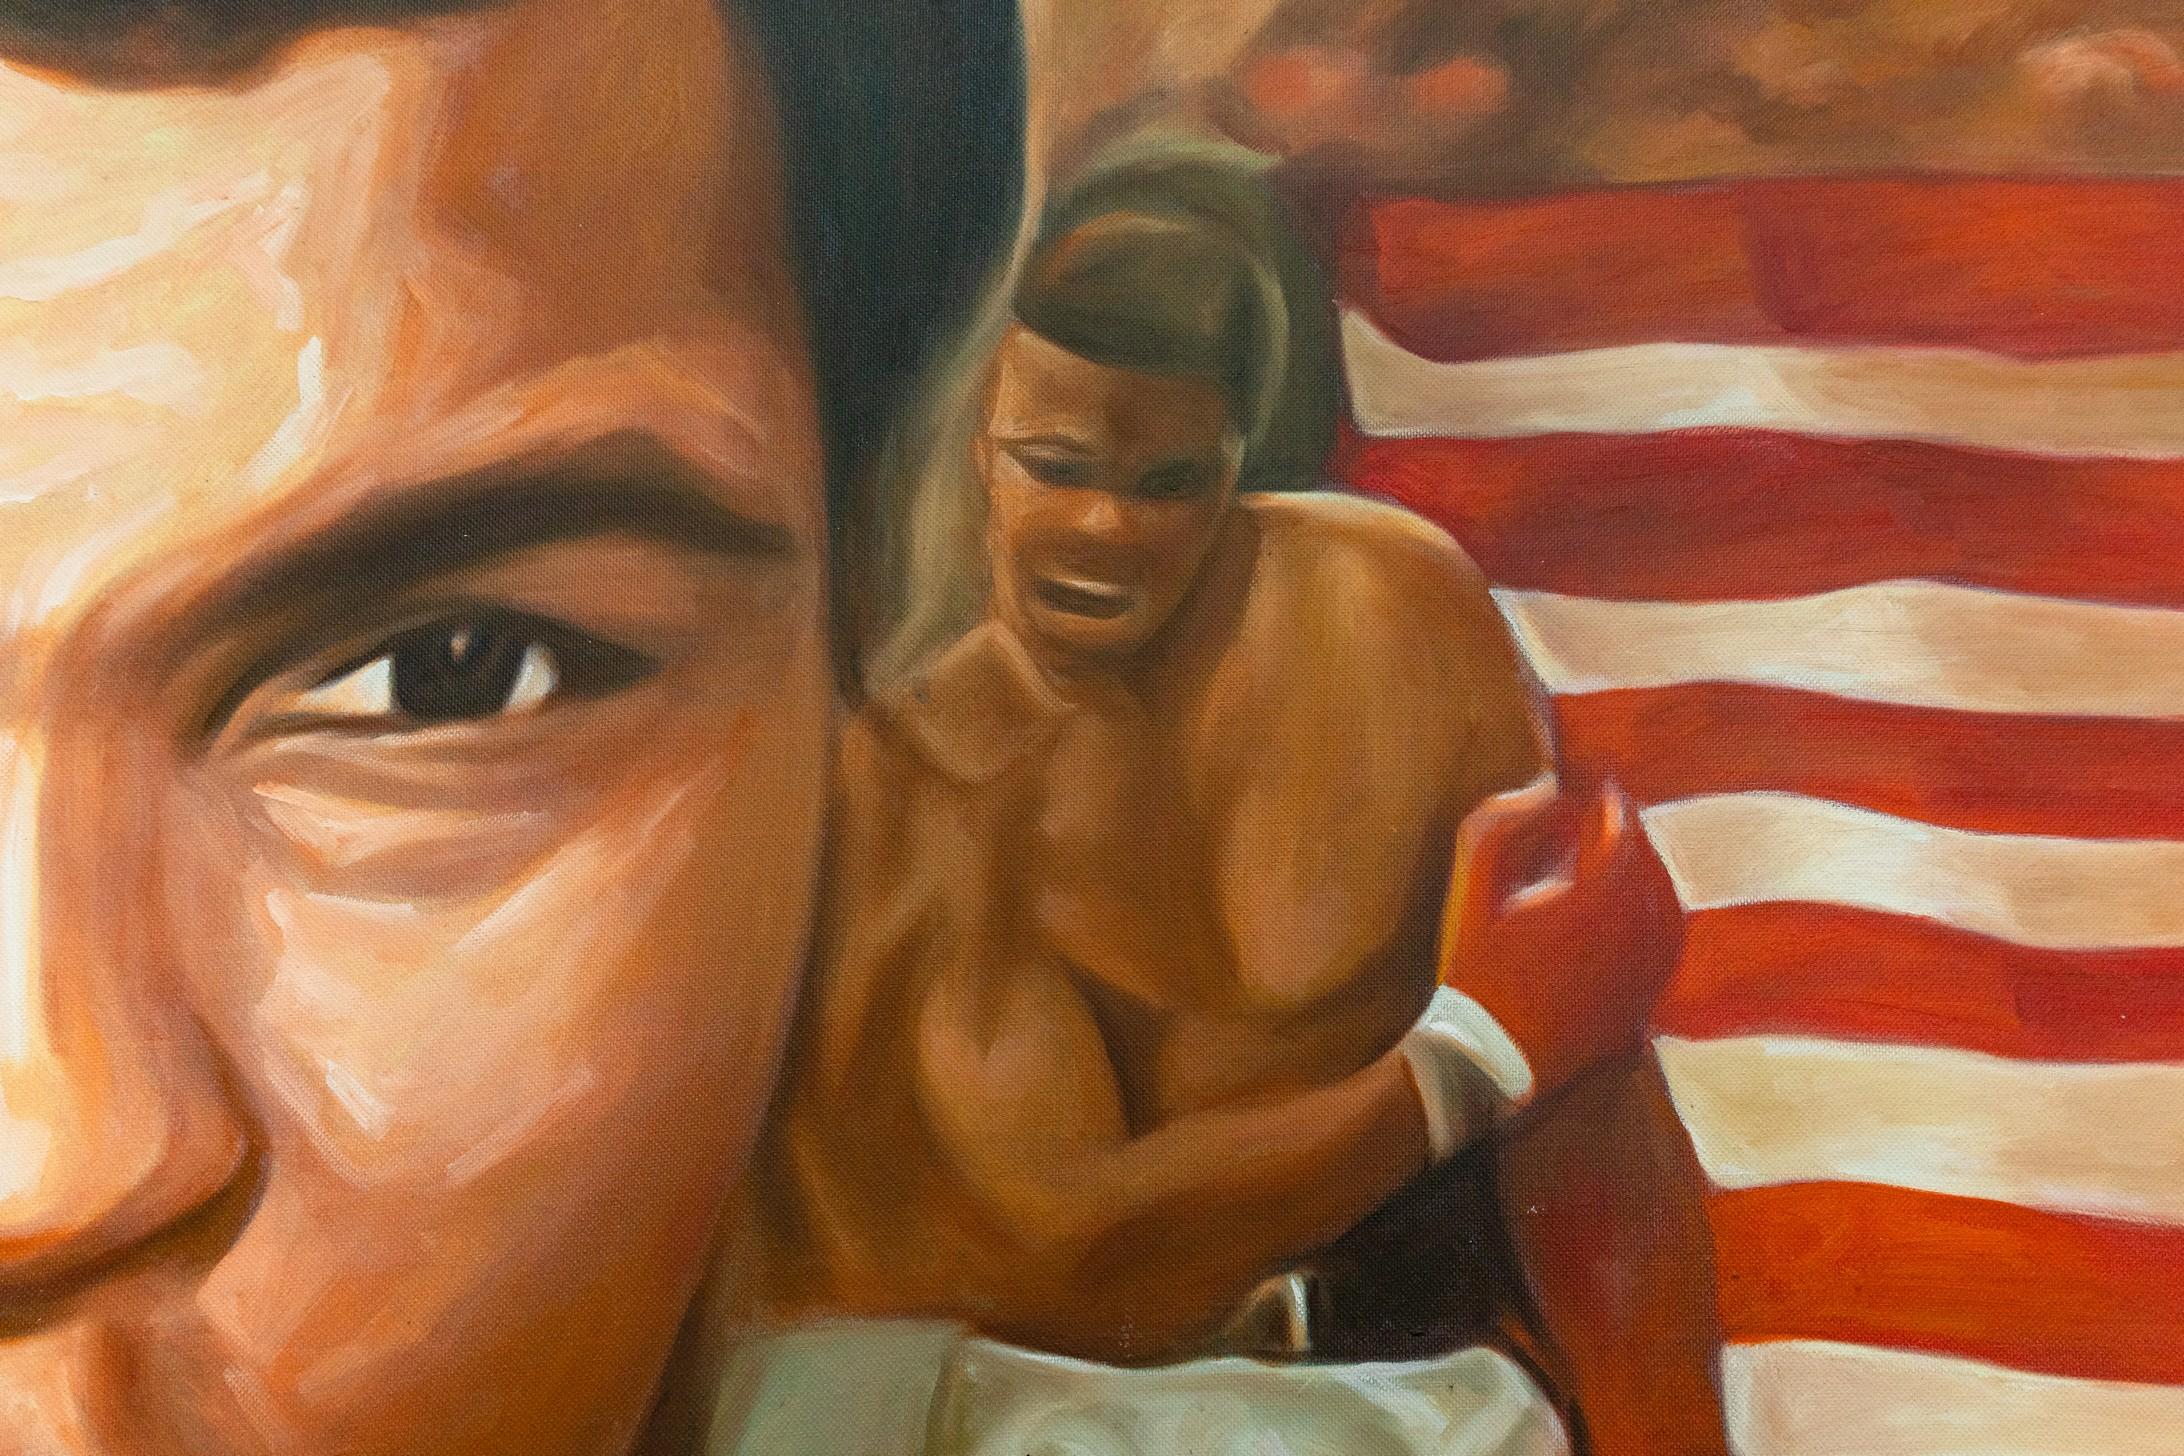 This powerful piece captures the iconic vigor and spirit of a legendary boxer Muhammed Ali, famously known for his quick footwork and sharp jabs, epitomized by the phrase 